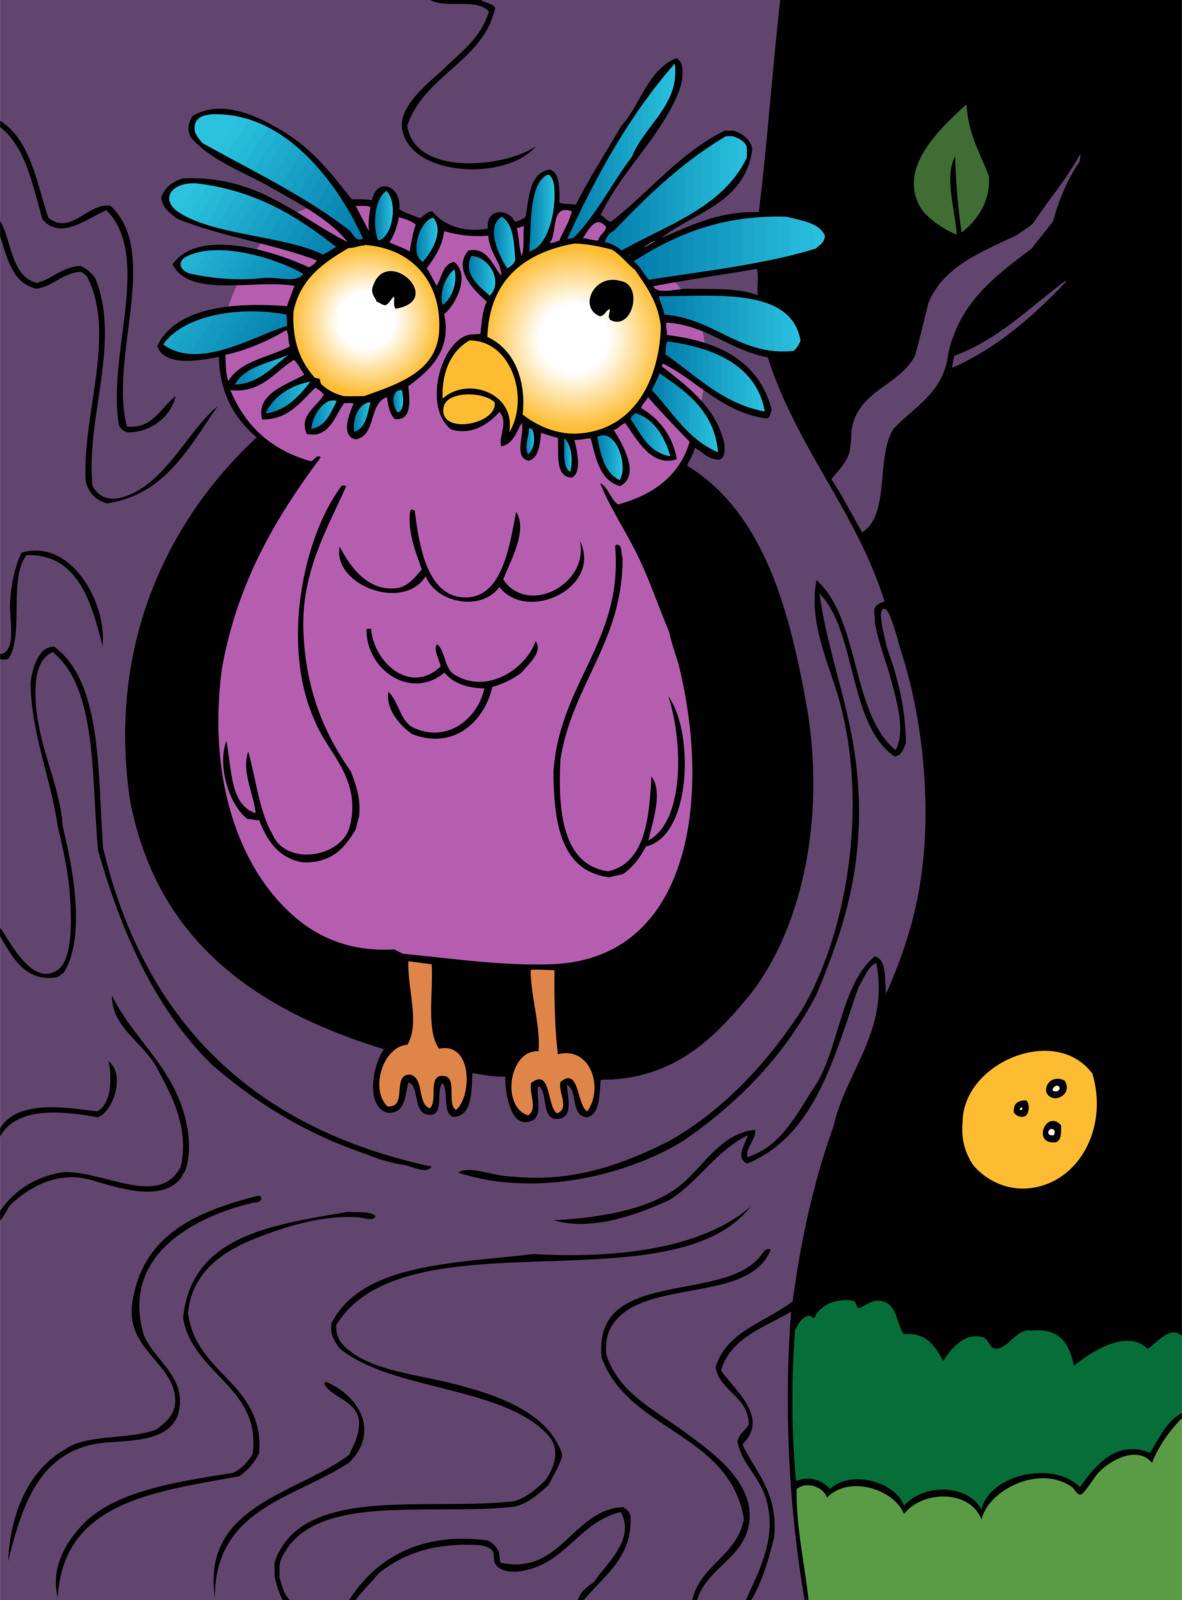 Night Owl by cteconsulting